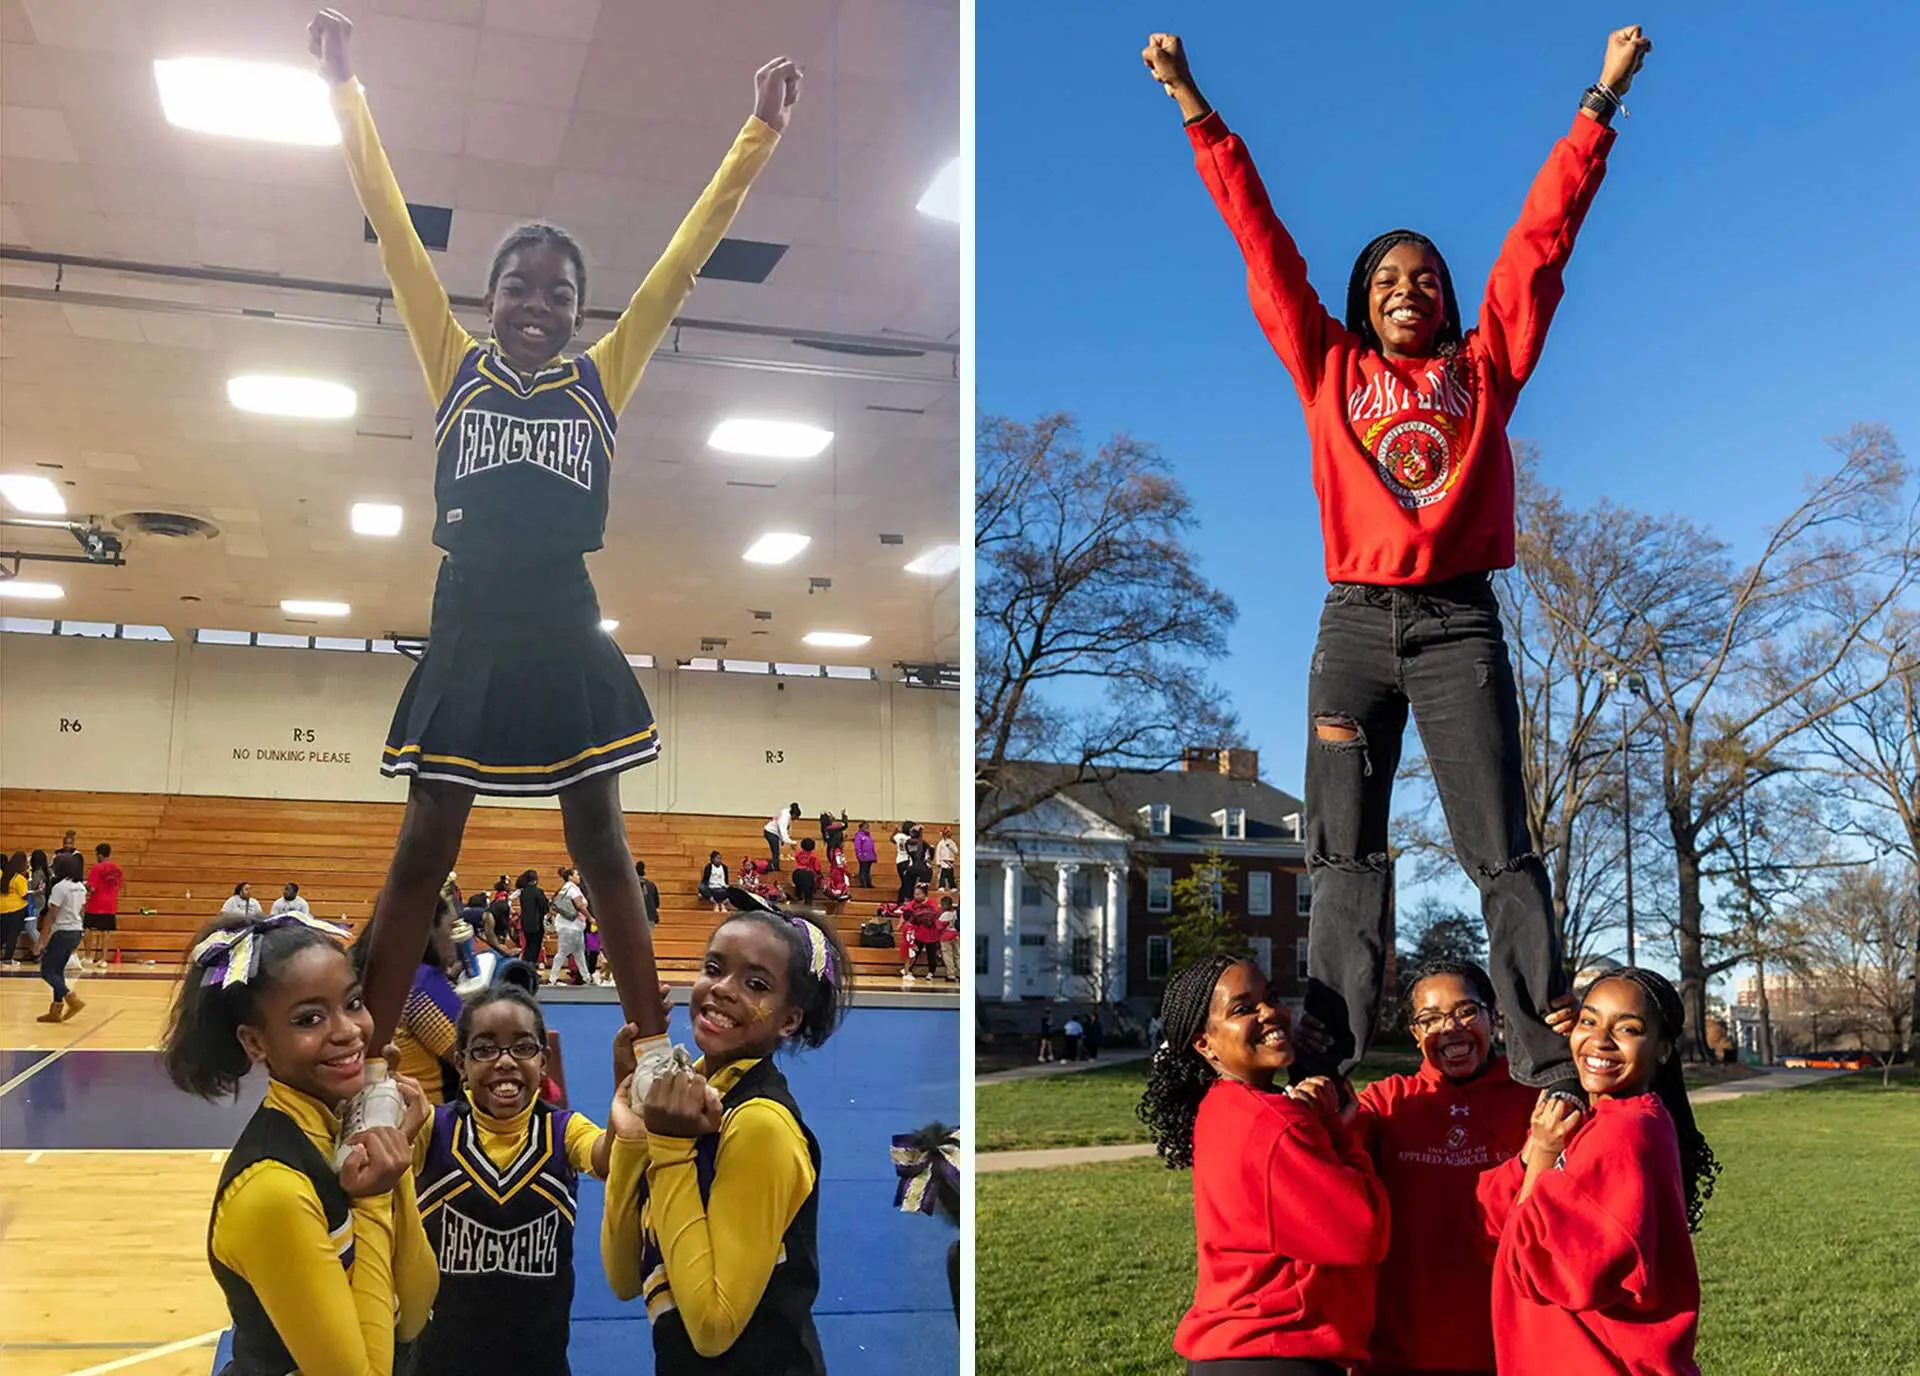 Kamryn Edwards '27, Amira Edwards '25, Britne Edwards '27 and Jade Edwards '24 are two sets of twins from the same family, all attending UMD at the same time. Childhood photo (left) courtesy of Edwards family; photo (right) by Riley N. Sims Ph.D '23